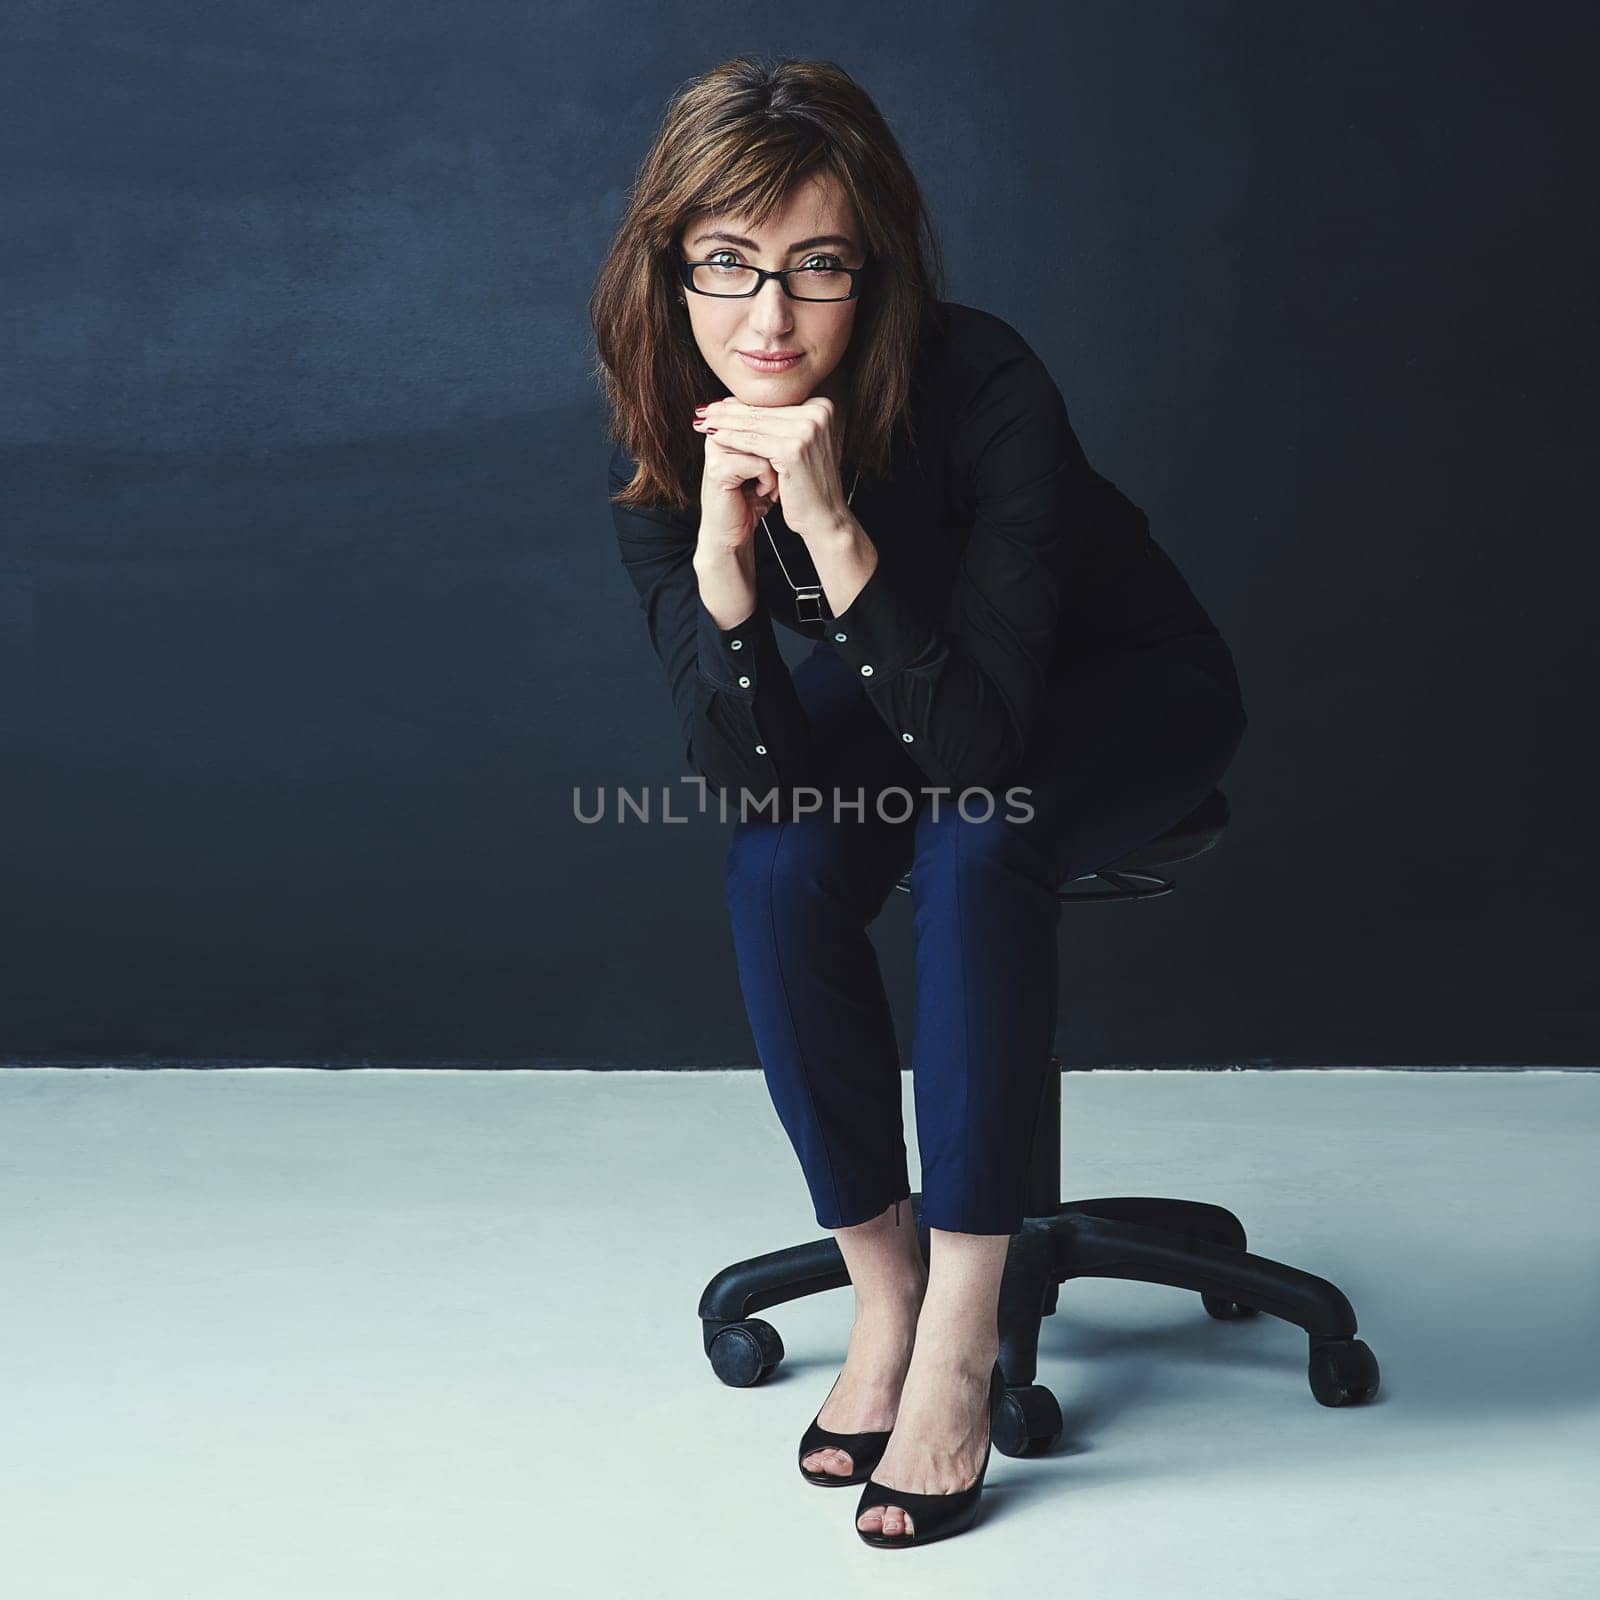 Forward-thinking is essential if you want to stay on top. Studio portrait of a corporate businesswoman posing against a dark background. by YuriArcurs